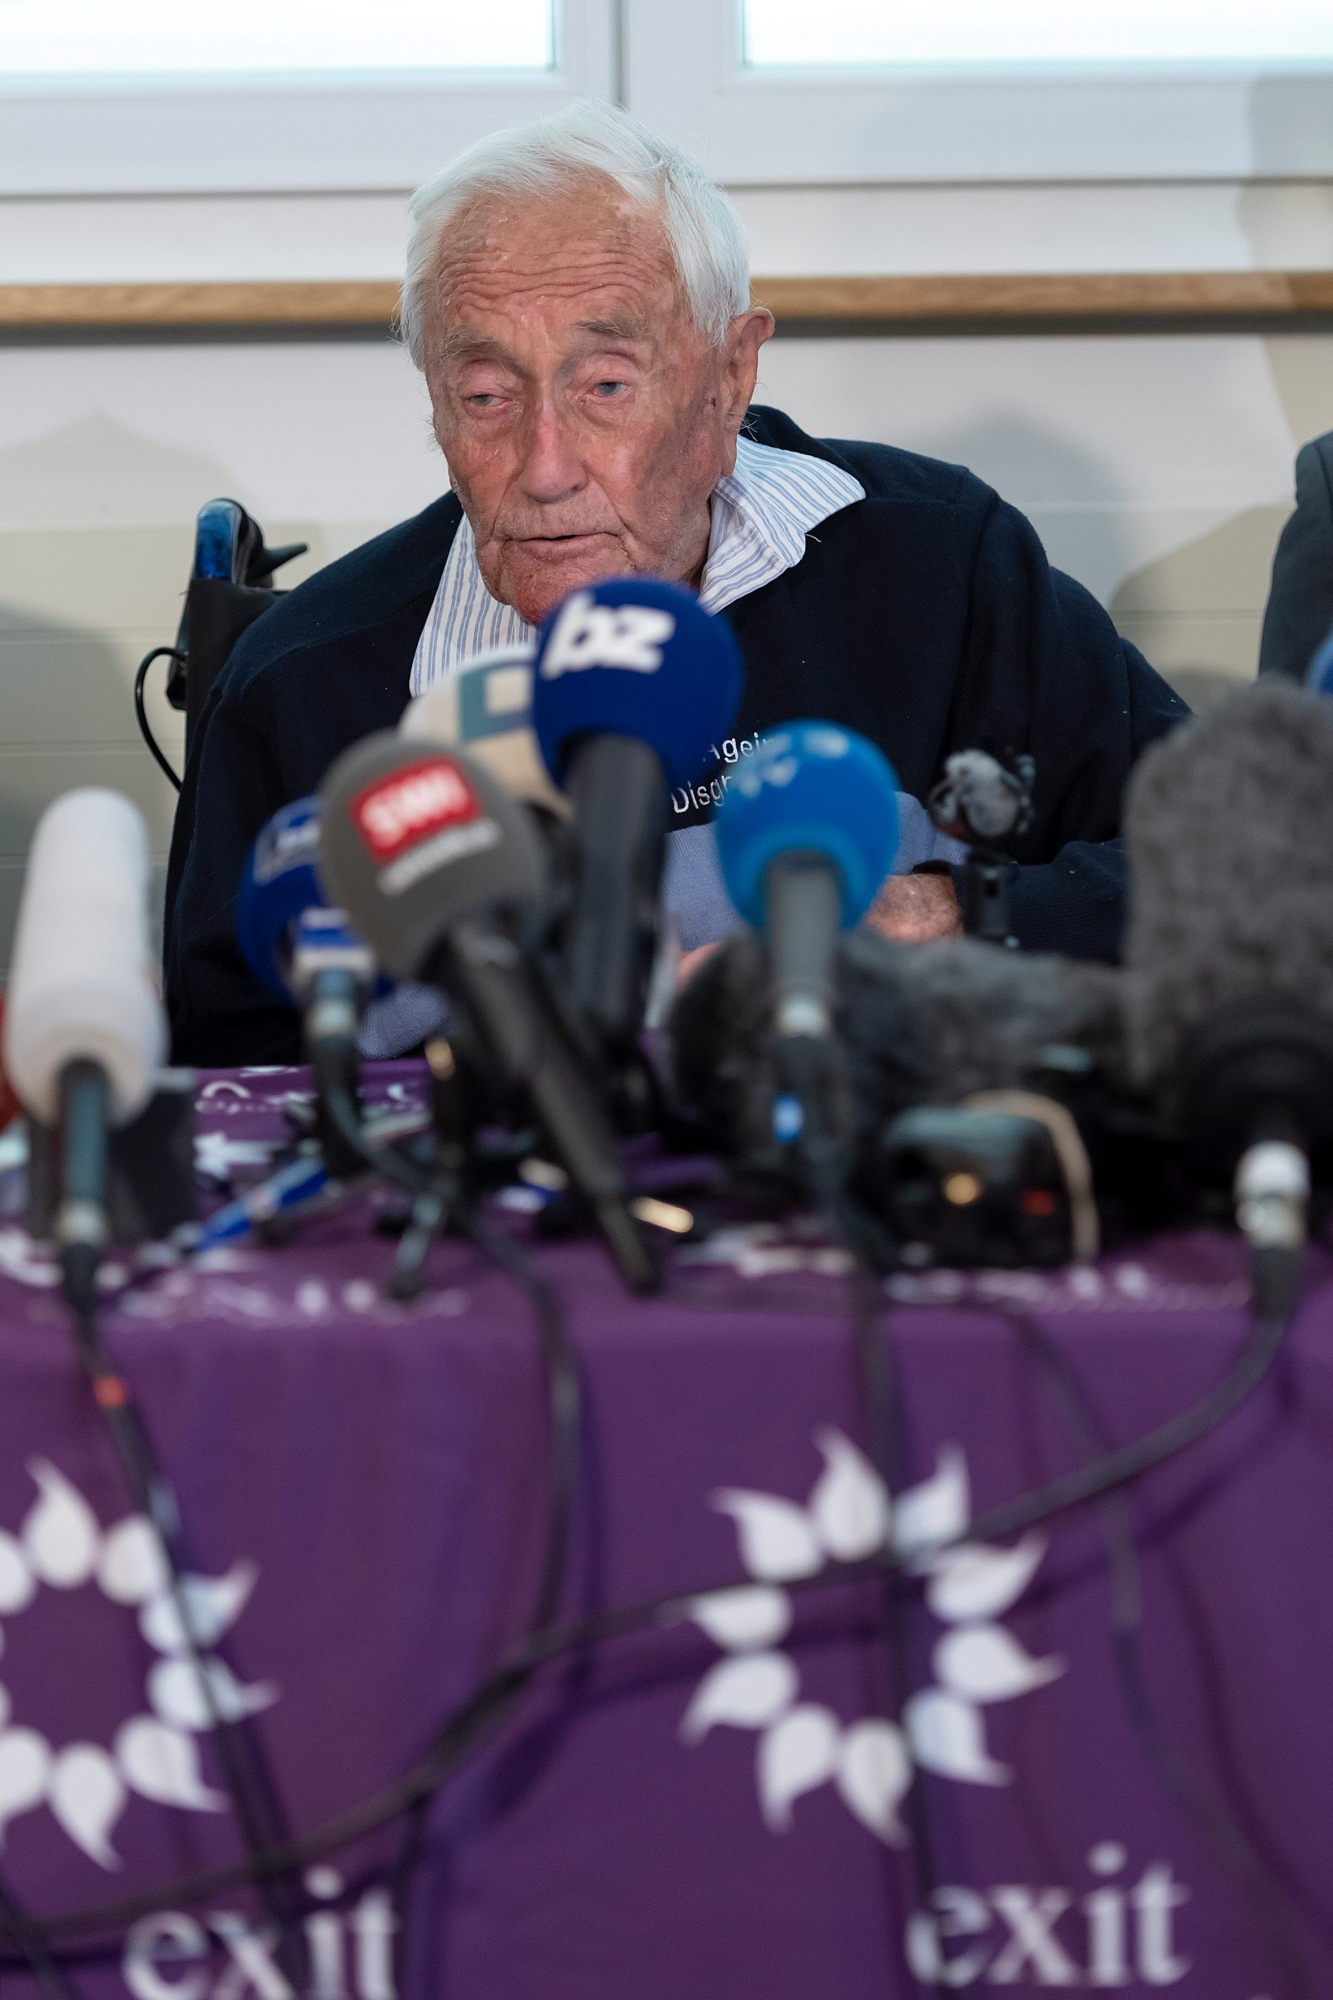 104-year-old Australian scientist David Goodall speaks during his press conference a day before his assisted suicide in Basel, Switzerland, on Wednesday, May 9, 2018. (KEYSTONE/Georgios Kefalas) SWITZERLAND DAVID GOODALL EUTHANASIA